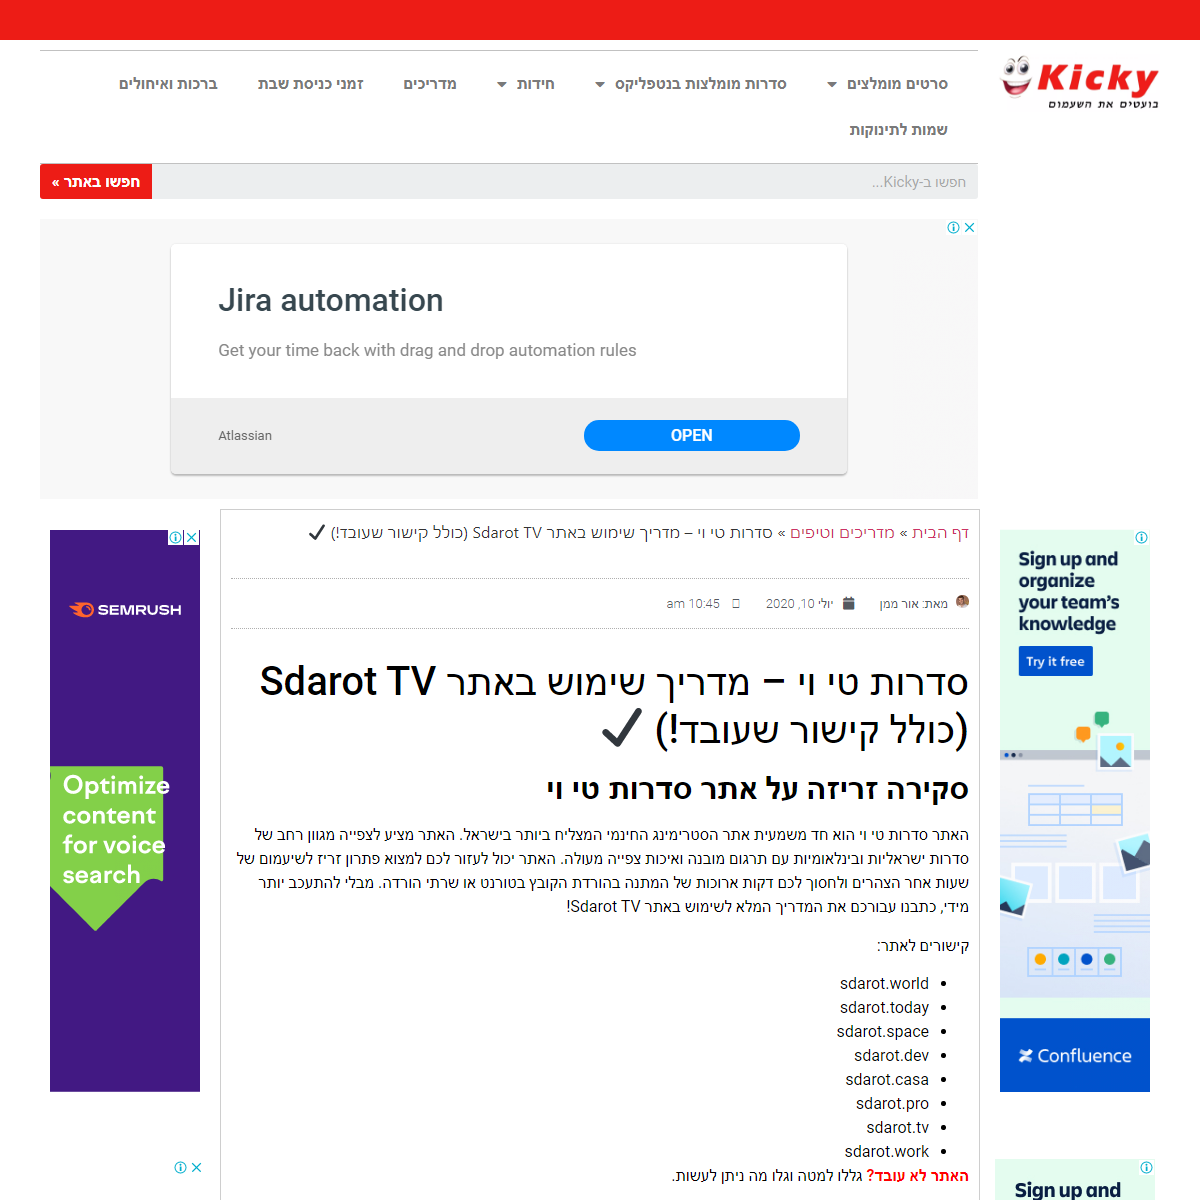 A complete backup of https://kicky.co.il/guides-and-tips/sdarot-tv/